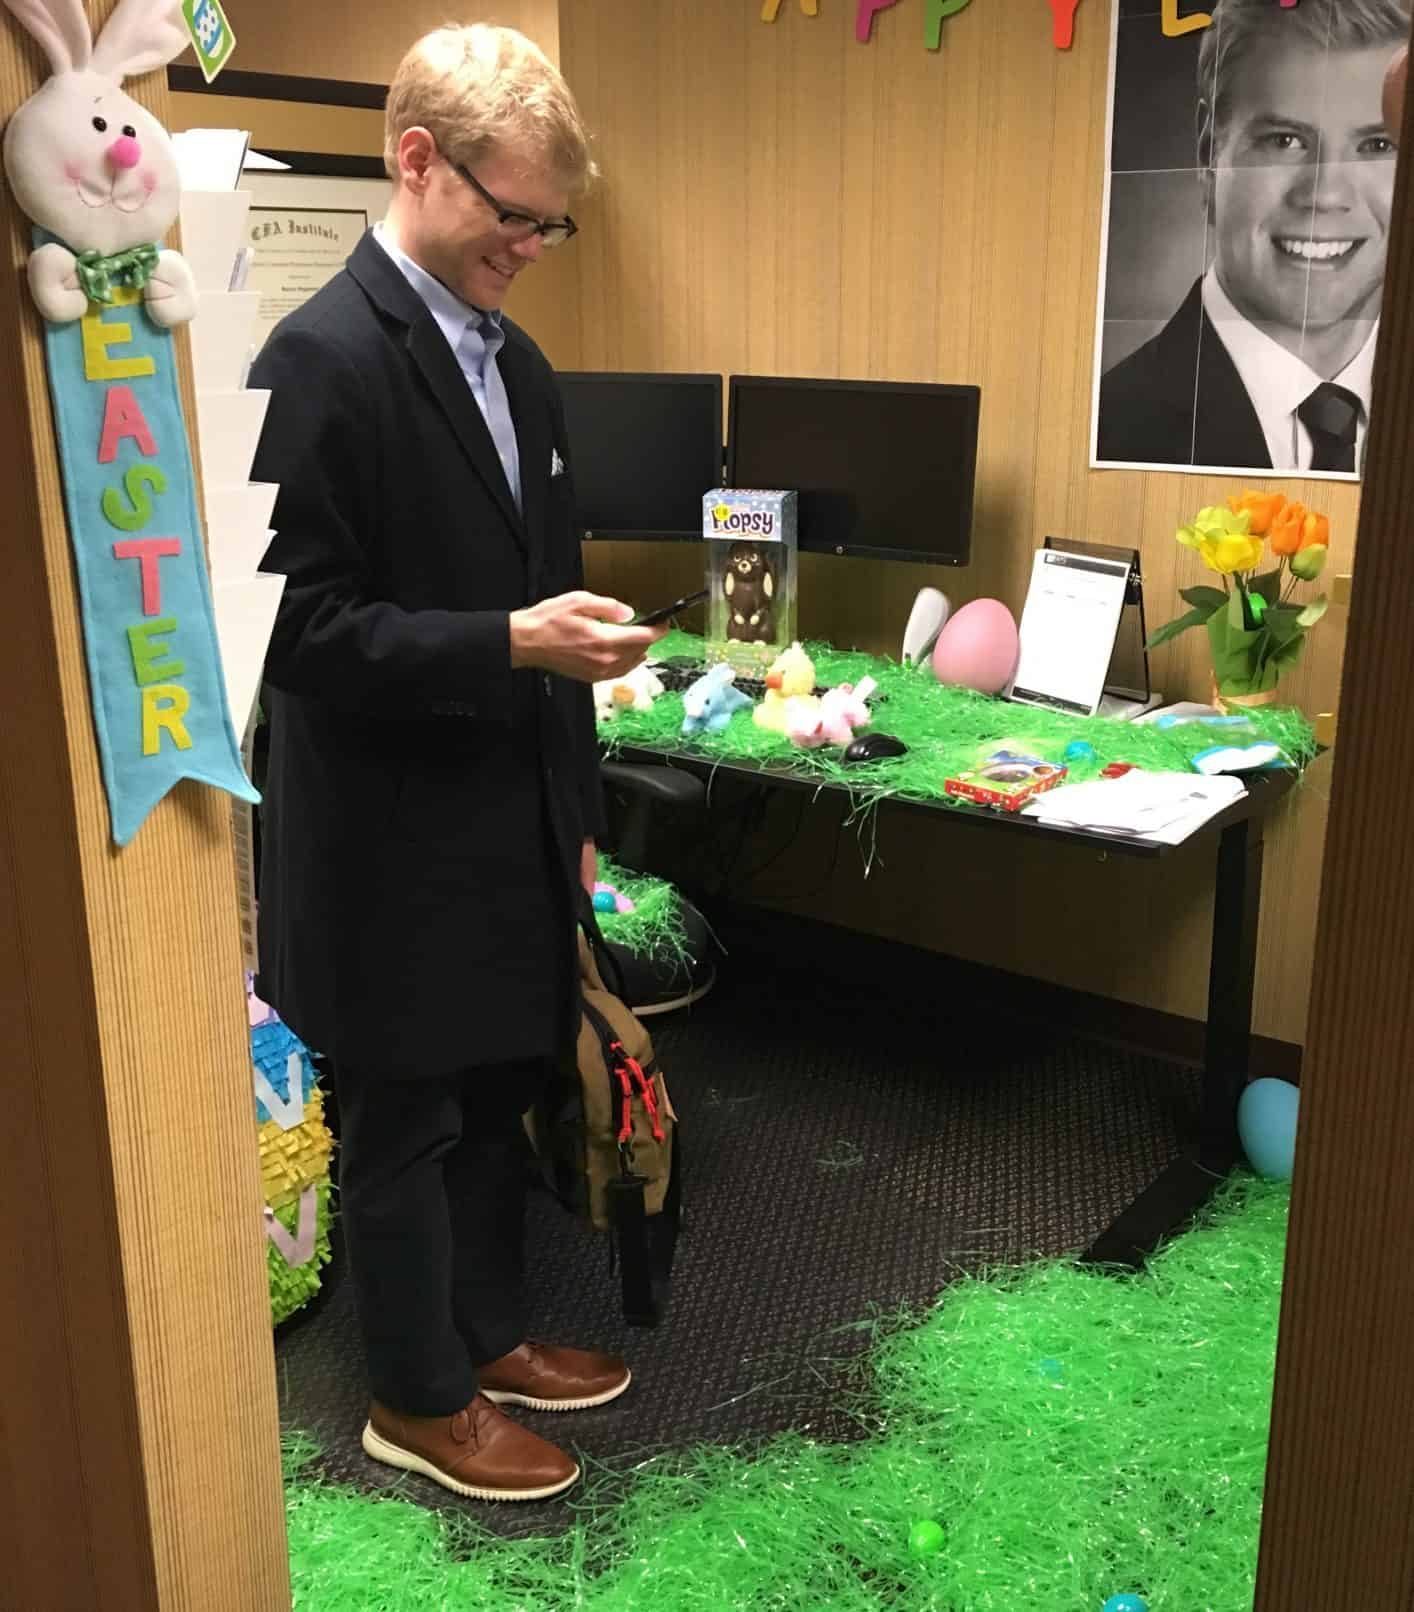 Spencer smiles as he discovers his cubicle has been changed into an Easter egg hunt